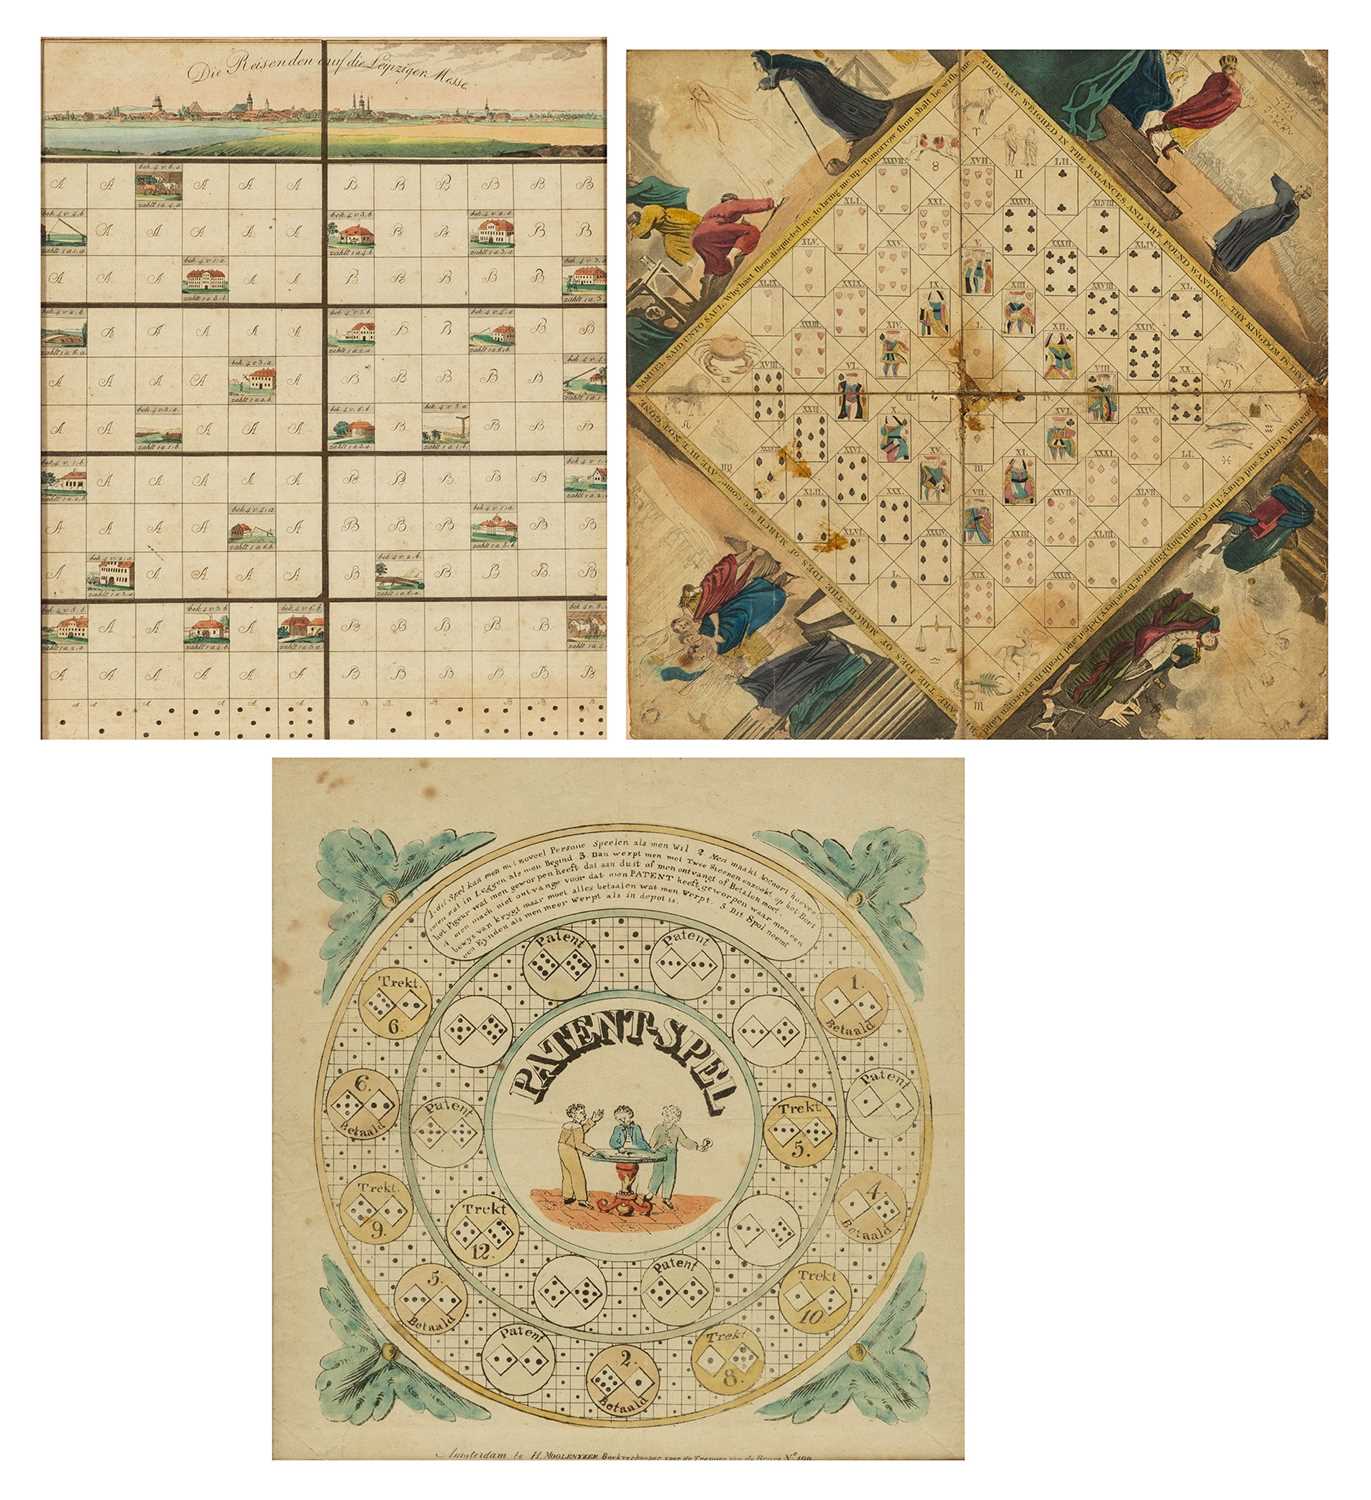 Lot 346 - Three nineteenth-century illustrated game boards involving either dice or cards